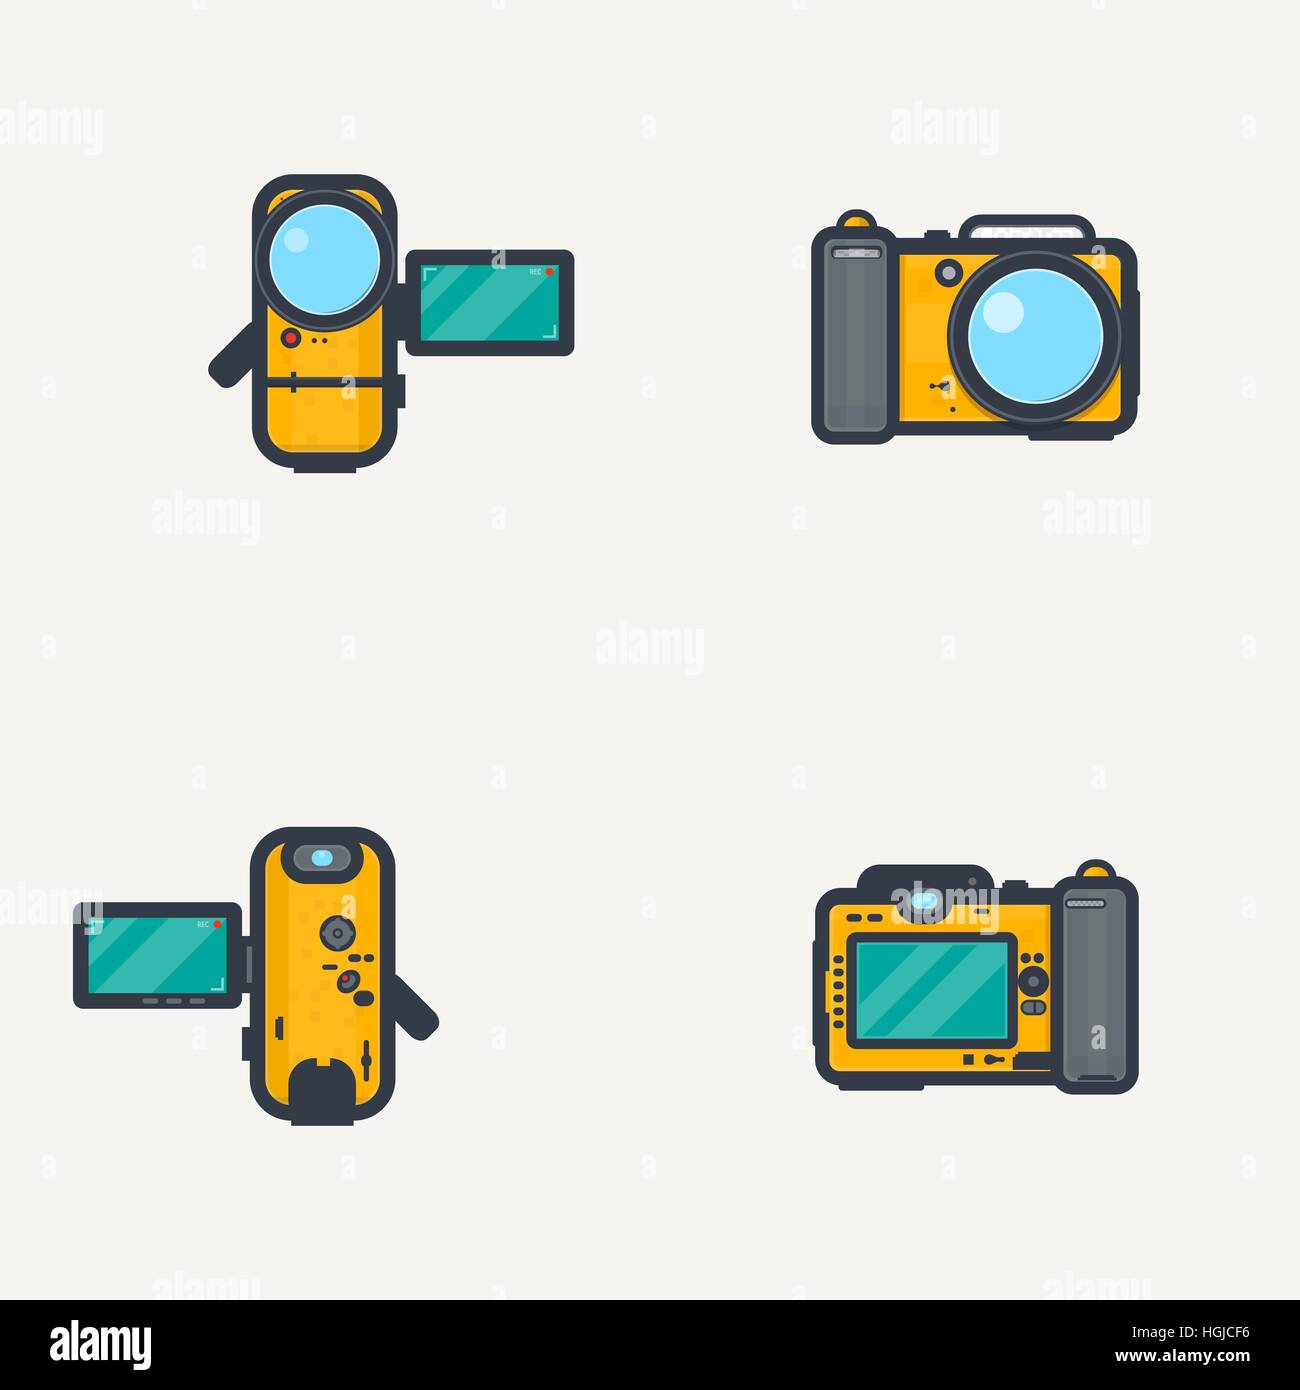 Line pixel style, sport waterproof yellow photo camera and video camera. View from front and back, with open display. Stock Vector